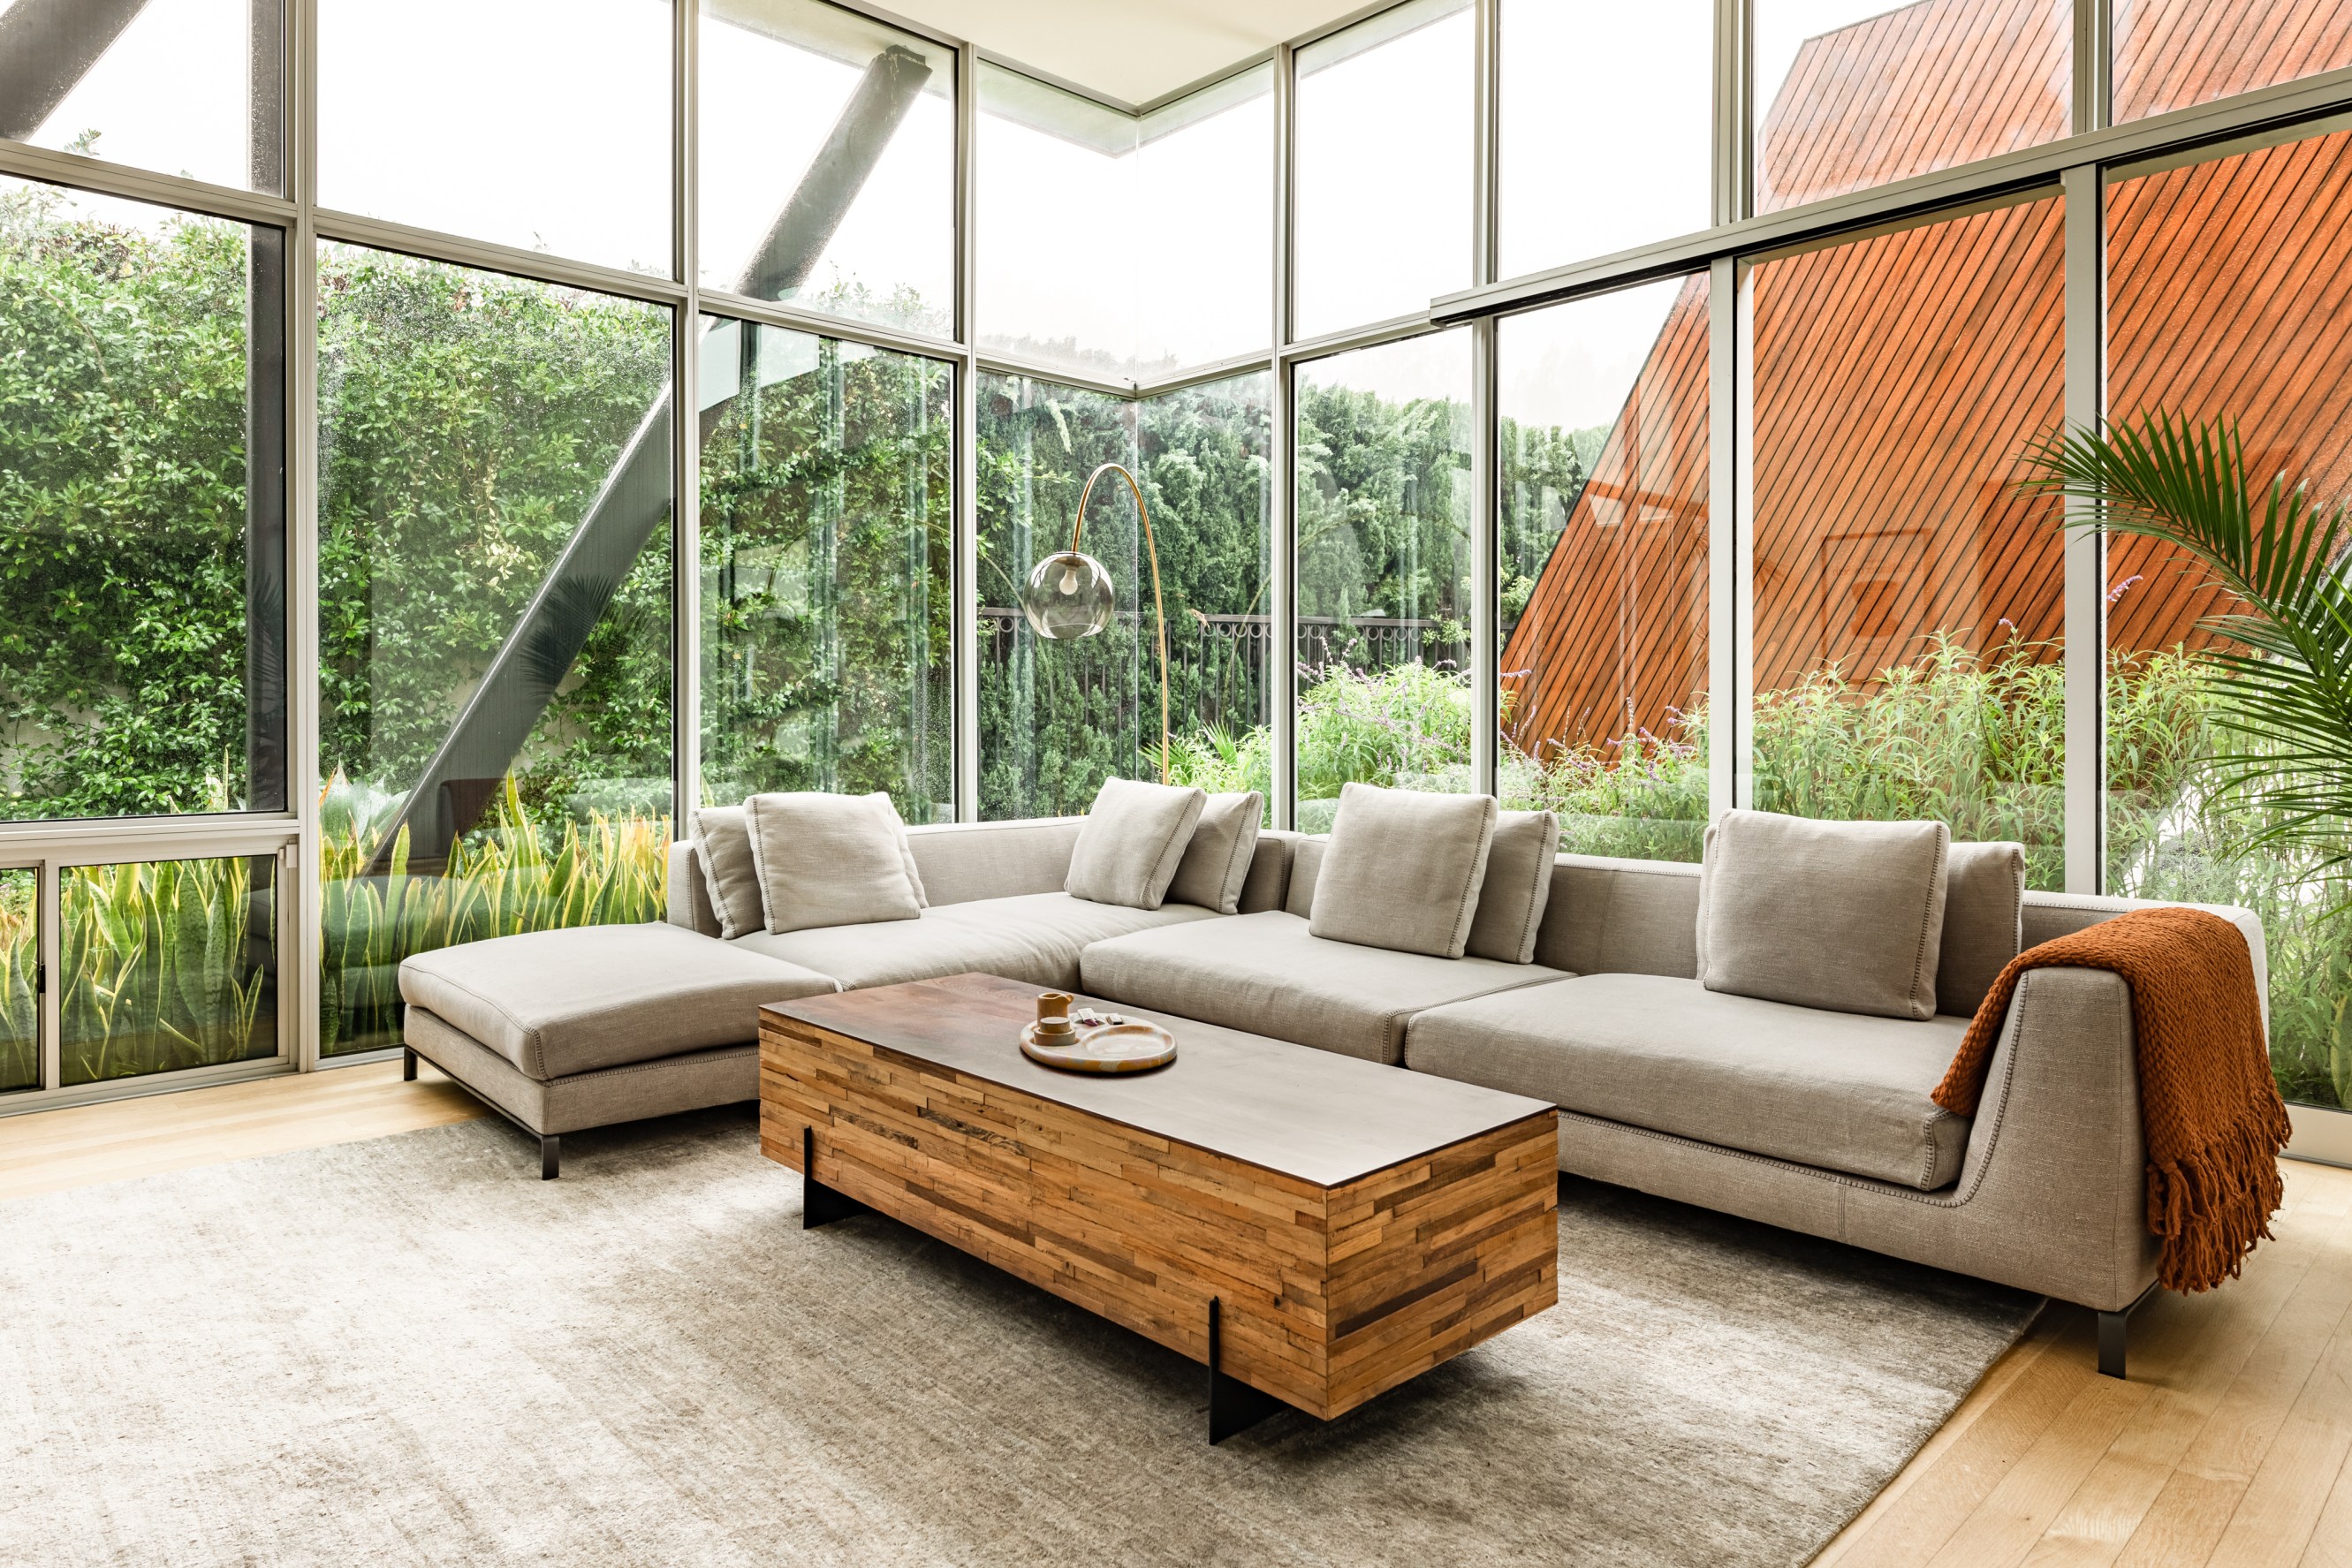 Houseplant home living room shot with floor to ceiling windows and a gray sectional couch and coffee table. Outdoor view includes a greenery wall that surrounds the house.